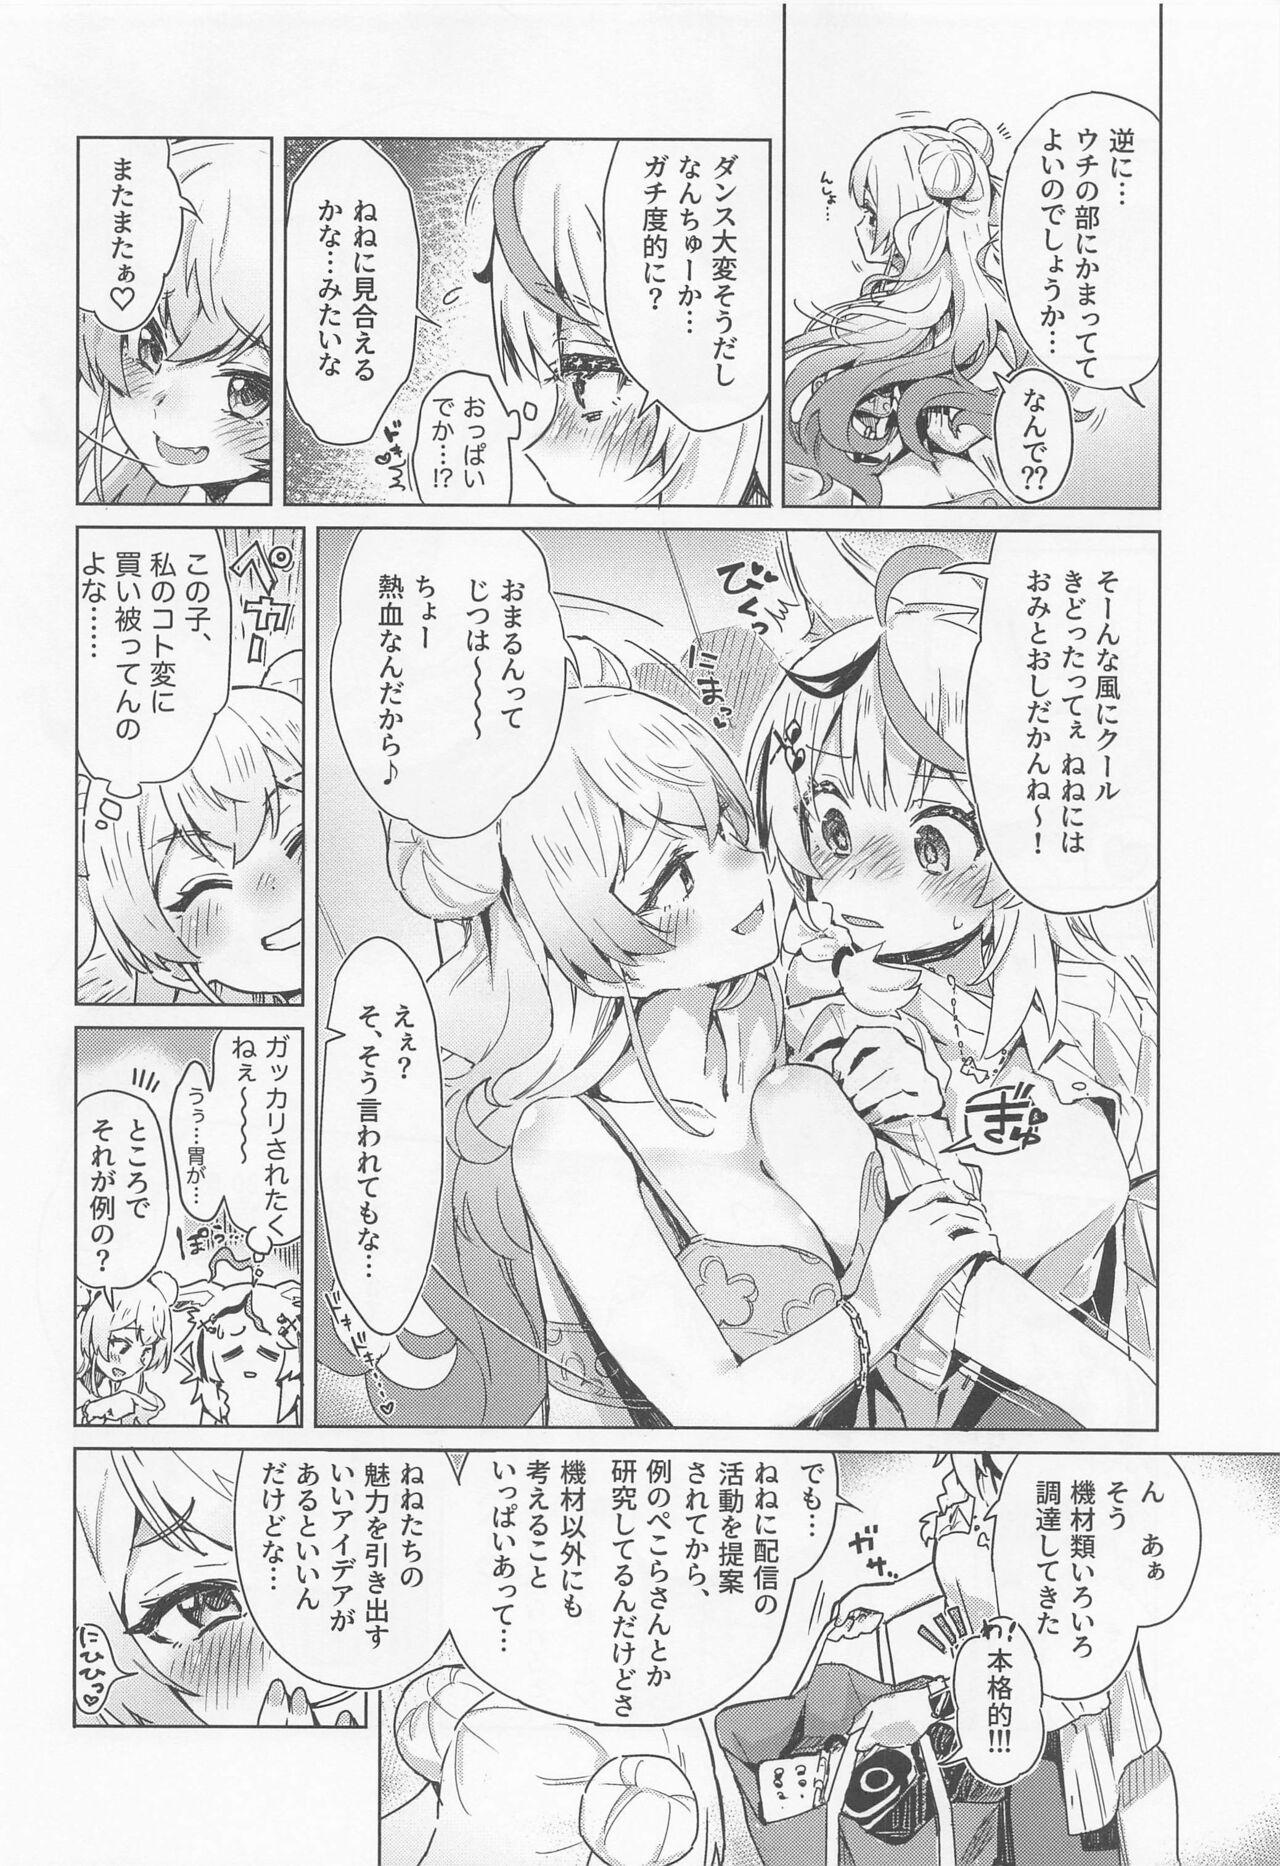 Blond Fennec wa Iseijin no Yume o Miru ka - Does The Fennec Dream of The Lovely Visitor? - Hololive Mamando - Page 7